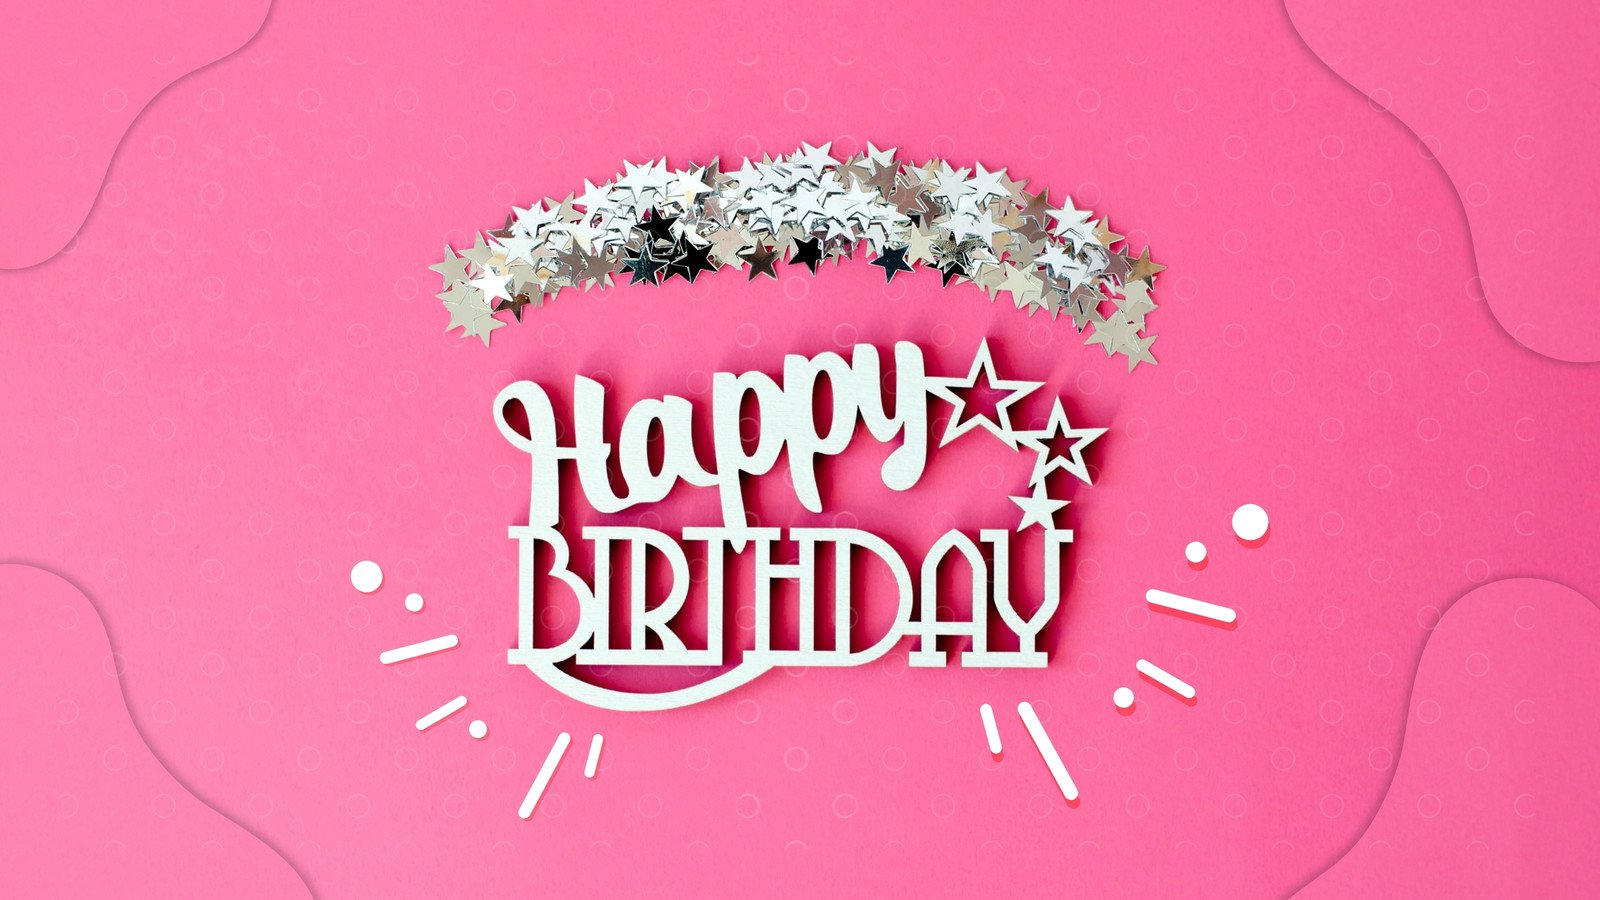 Birthday Background Images  Free iPhone  Zoom HD Wallpapers  Vectors   rawpixel